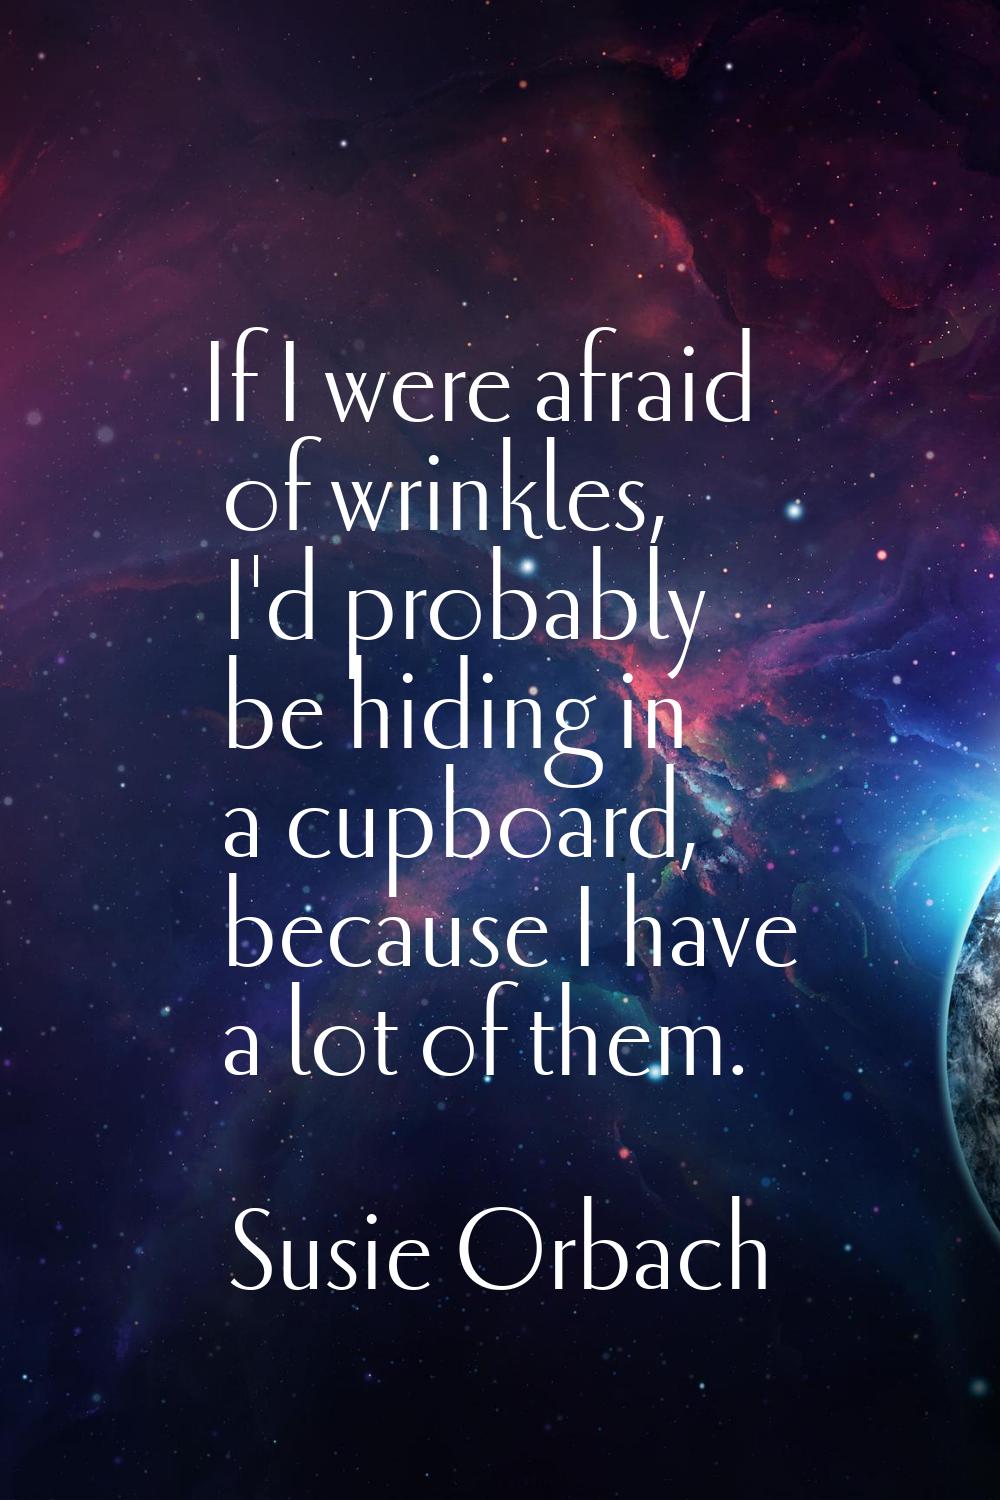 If I were afraid of wrinkles, I'd probably be hiding in a cupboard, because I have a lot of them.